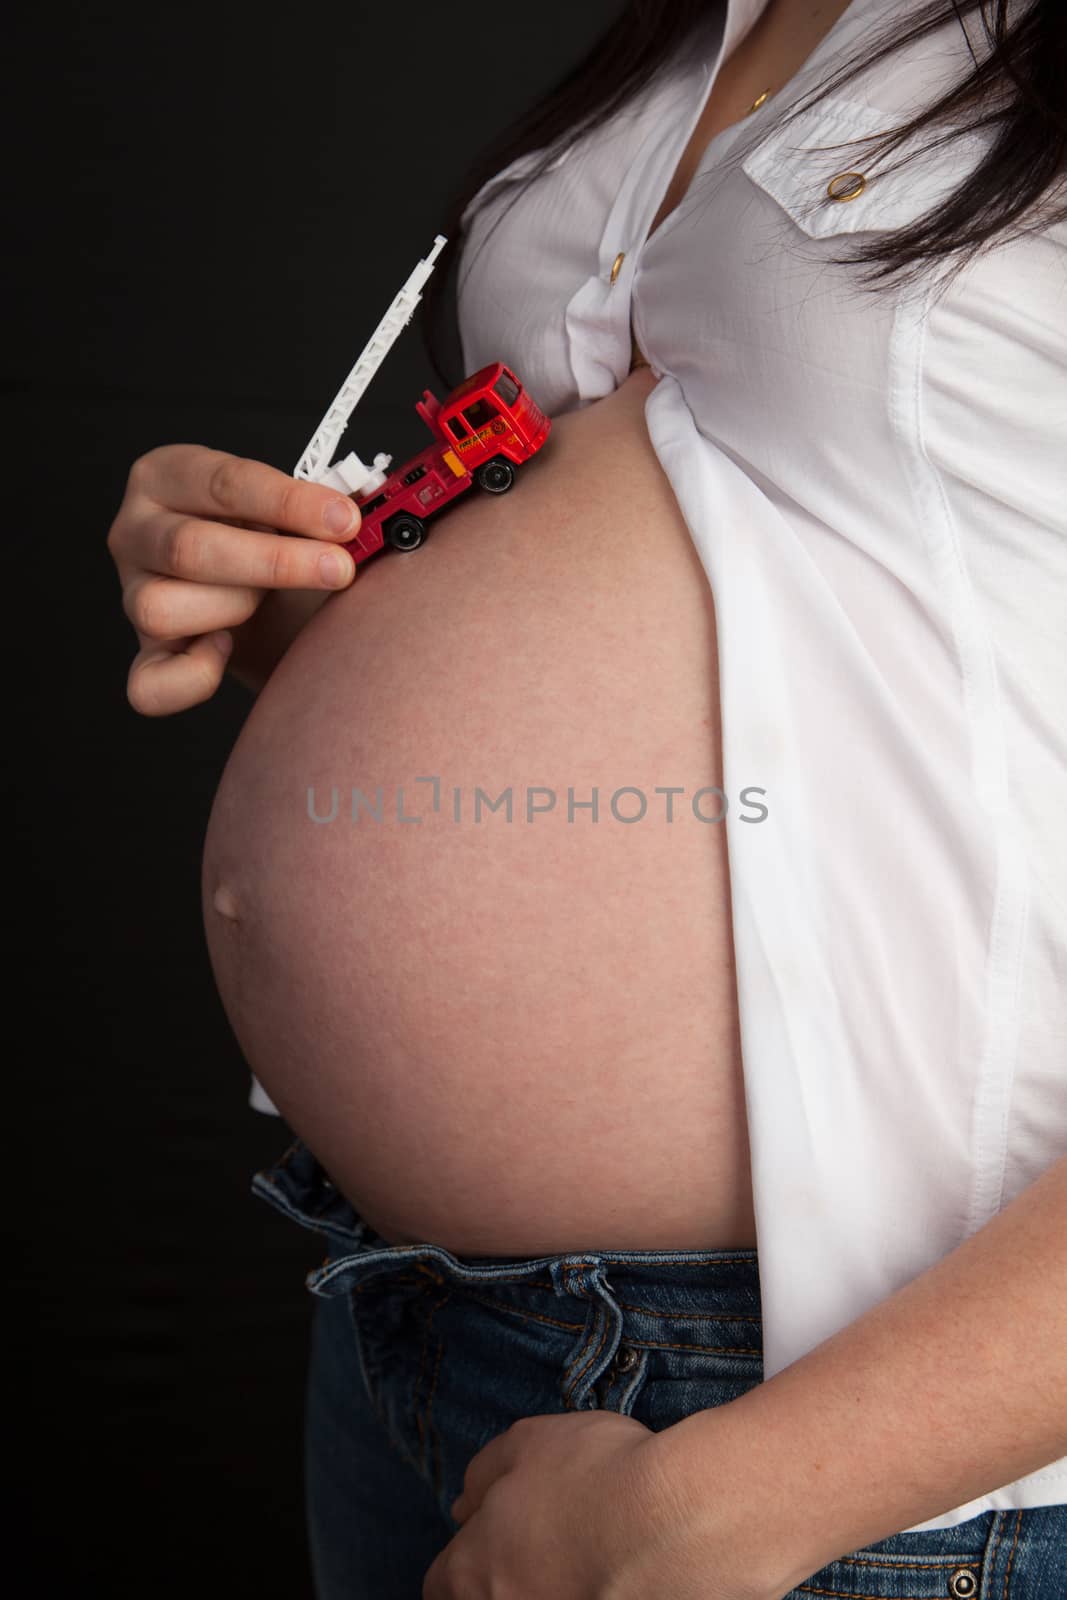 Pregnant woman holding a fire truck on her belly by Izaphoto